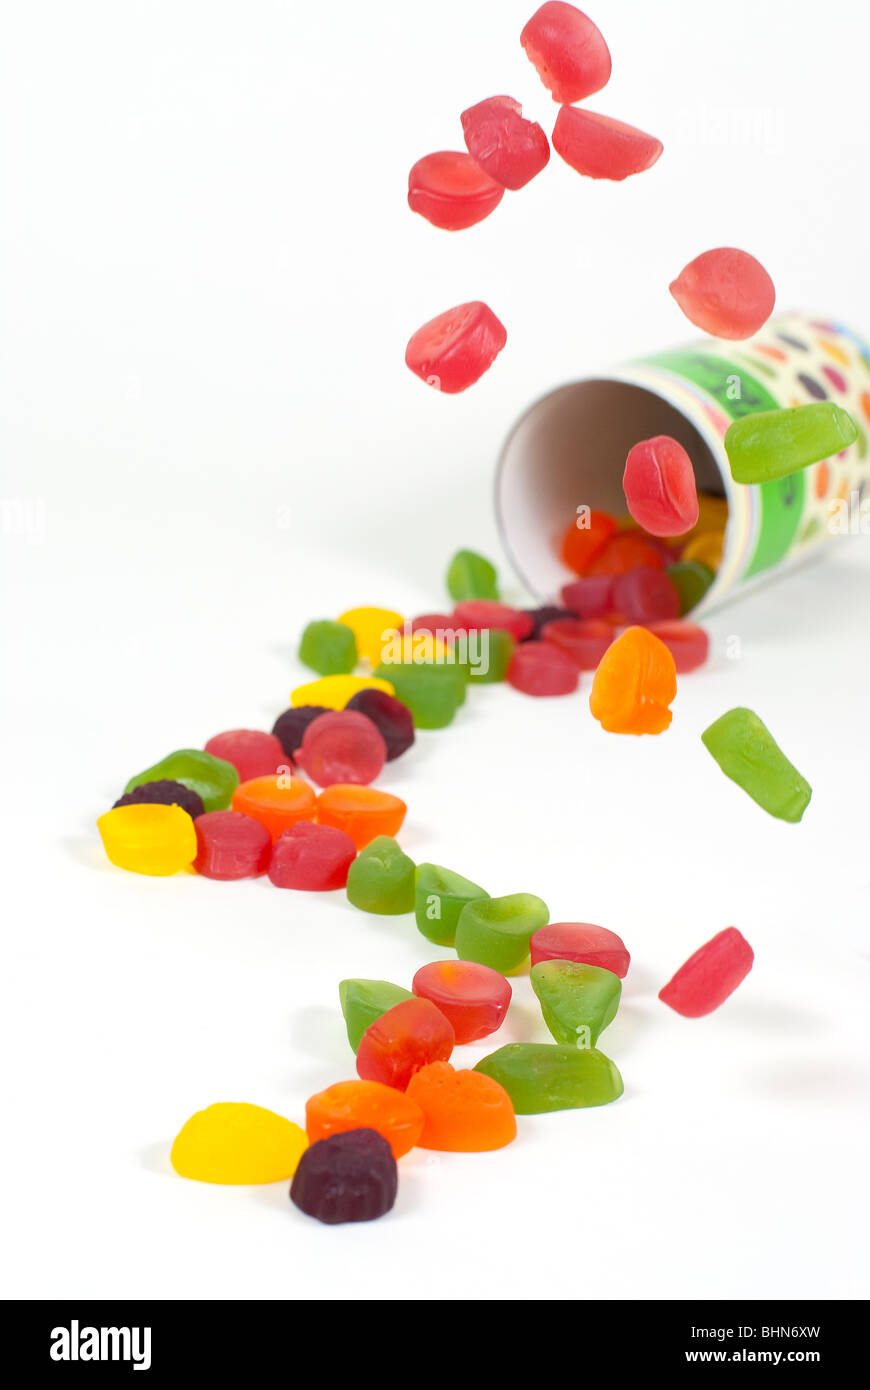 A rain of colorful candies falling on the table Stock Photo